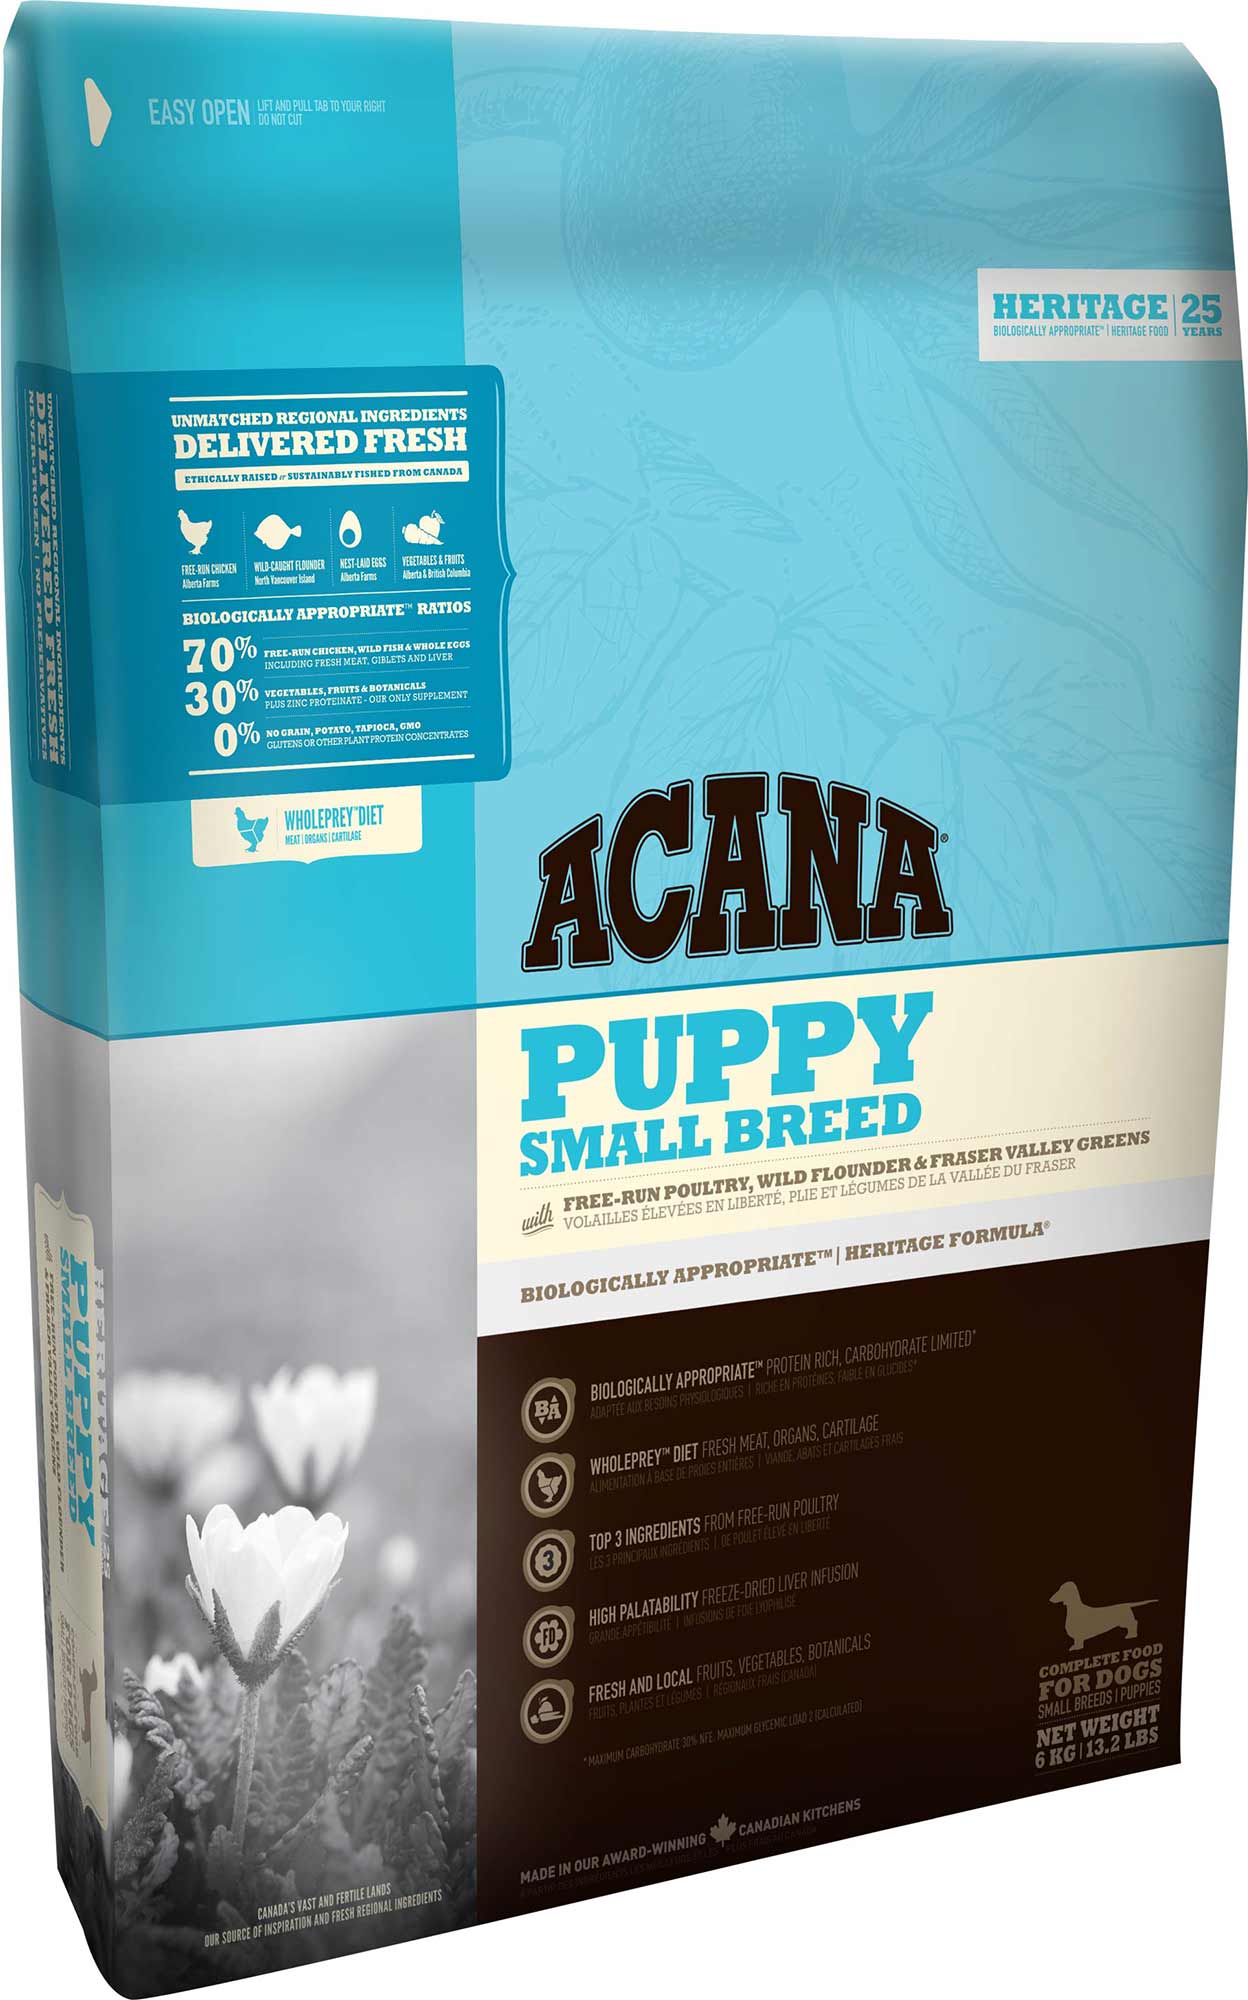 Acana Dog - Heritage - PUPPY SMALL BREED 2 Kg